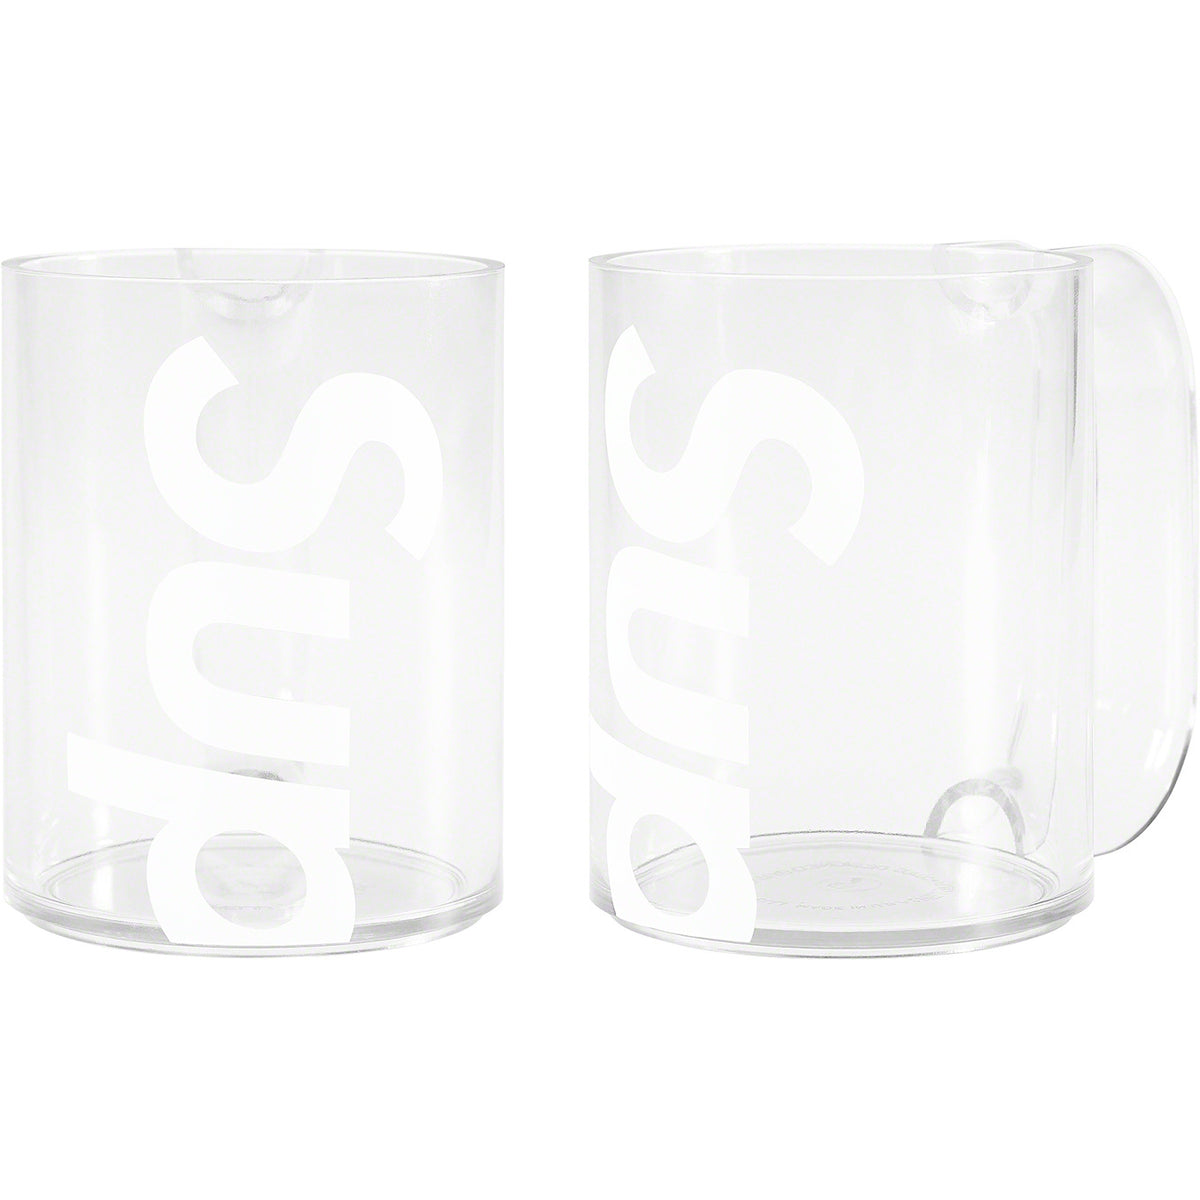 SUPREME HELLER MUGS (SET OF 2) CLEAR – 8pm Canada Store